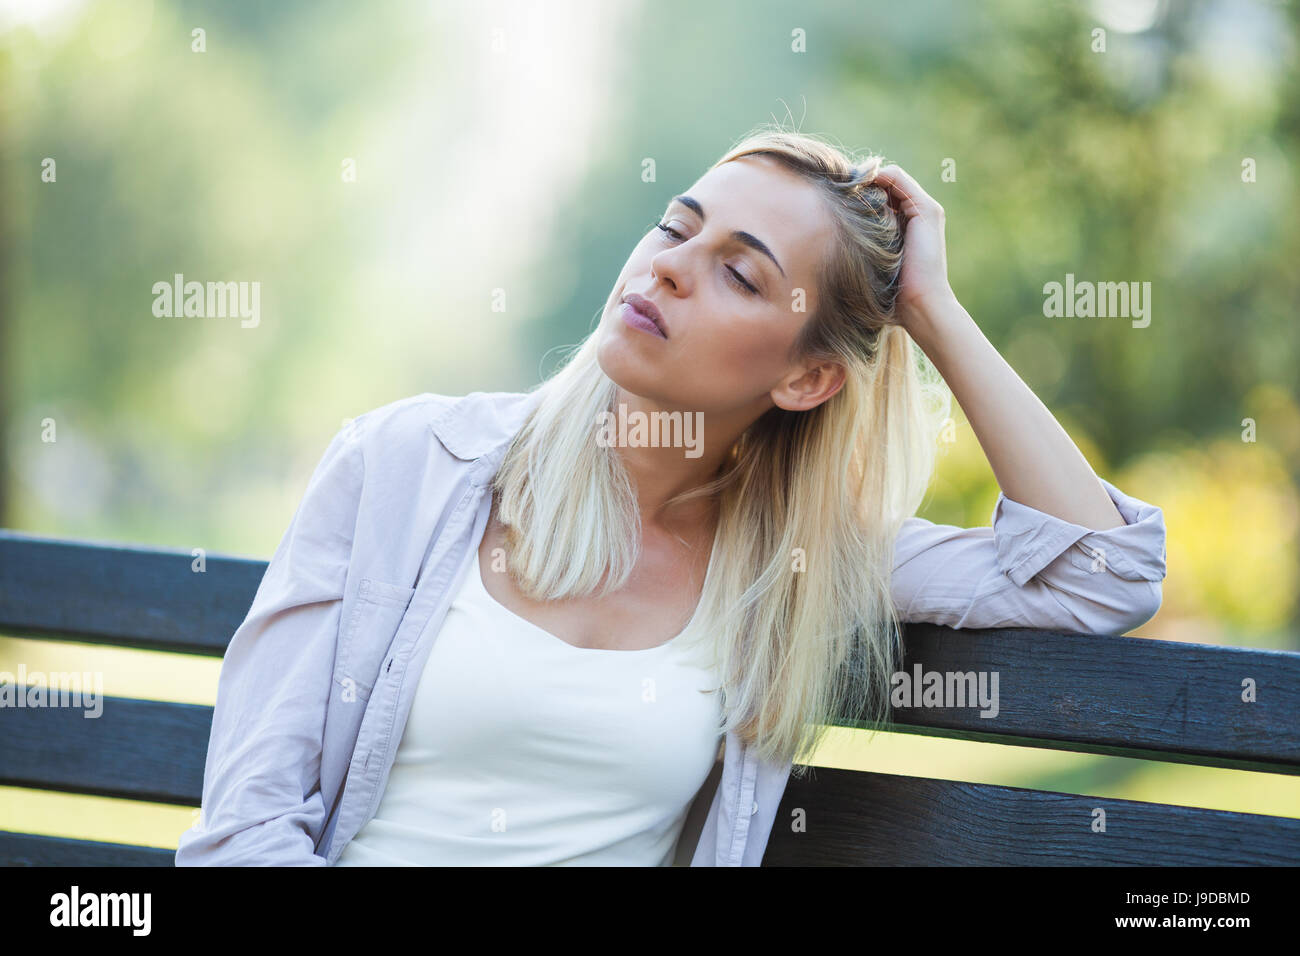 Lonely woman sitting in park in despair. Stock Photo